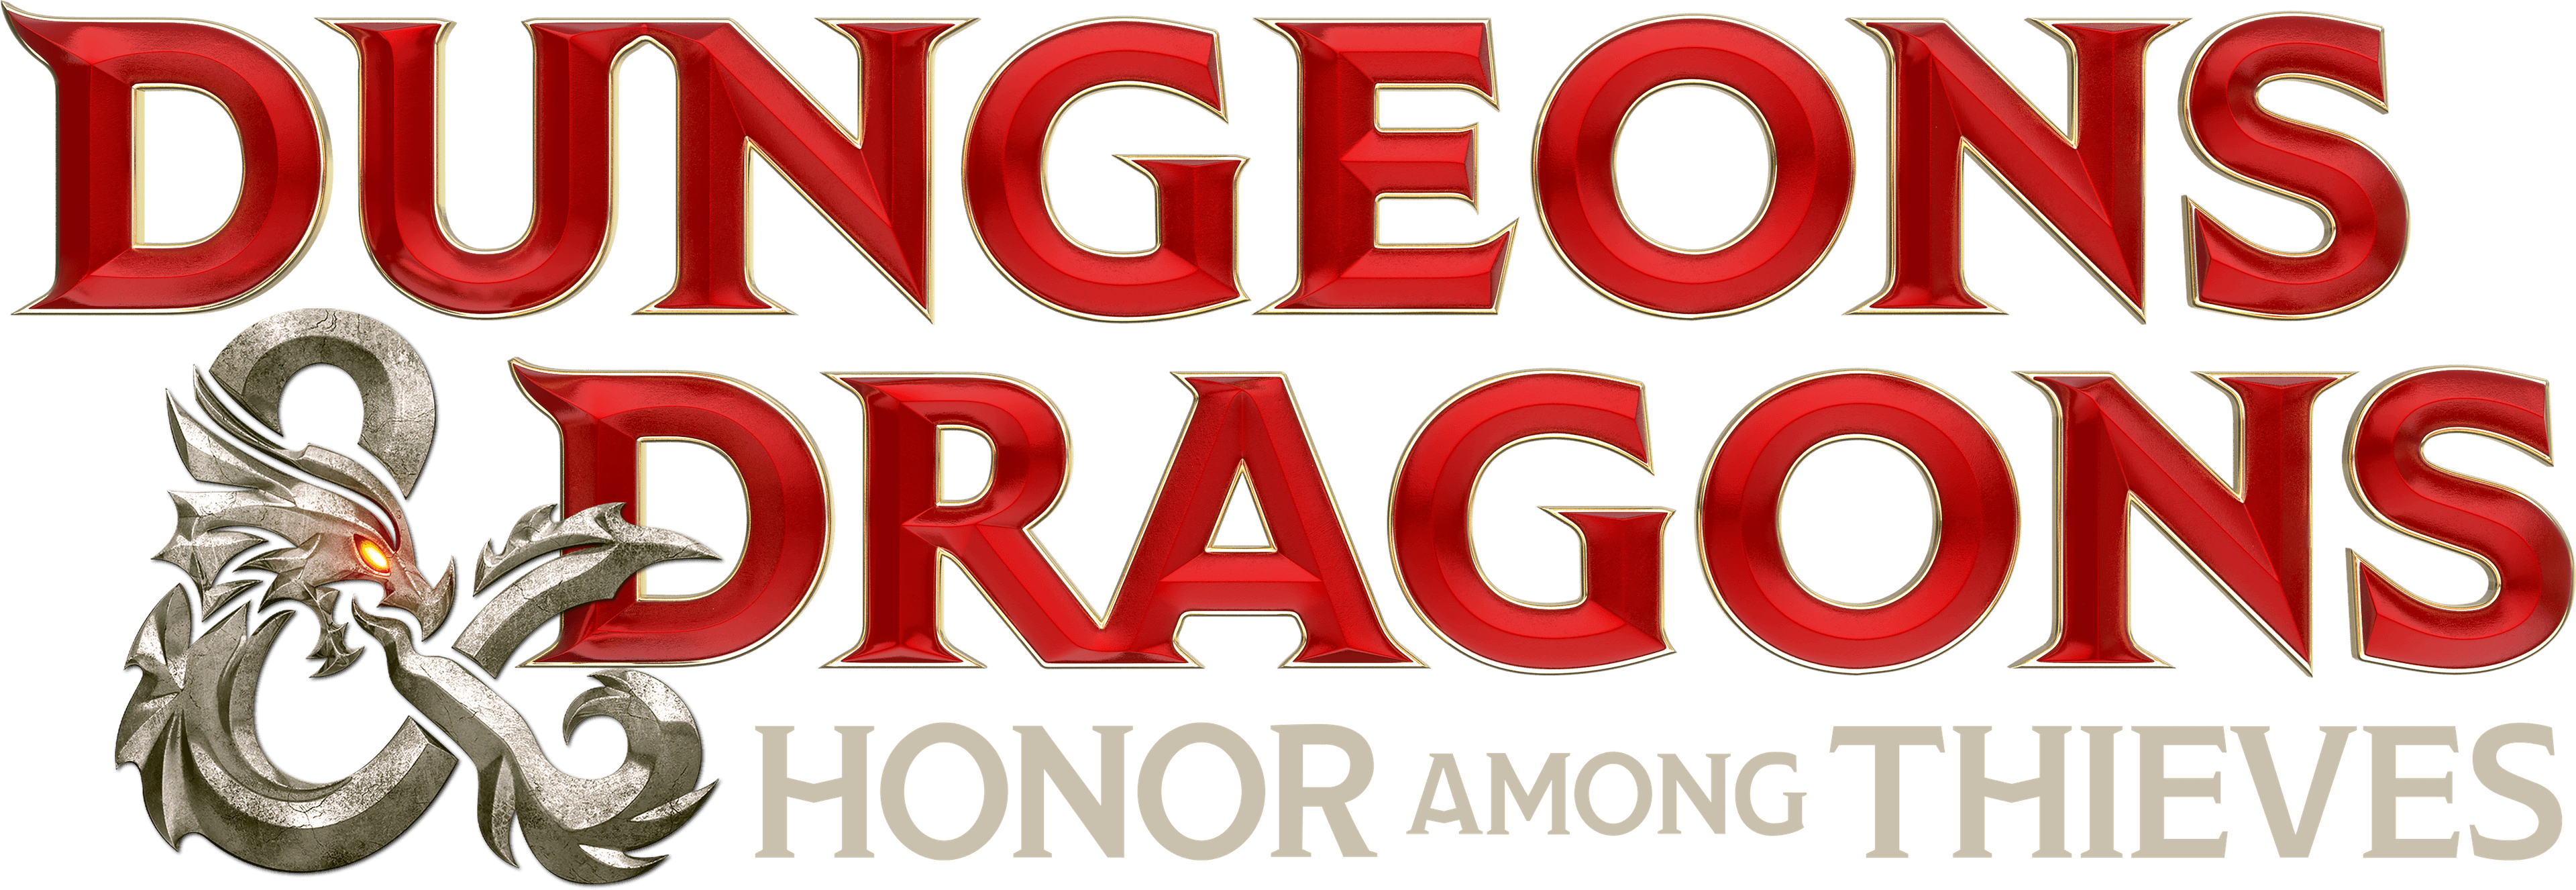 Dungeons & Dragons: Honor Among Thieves logo